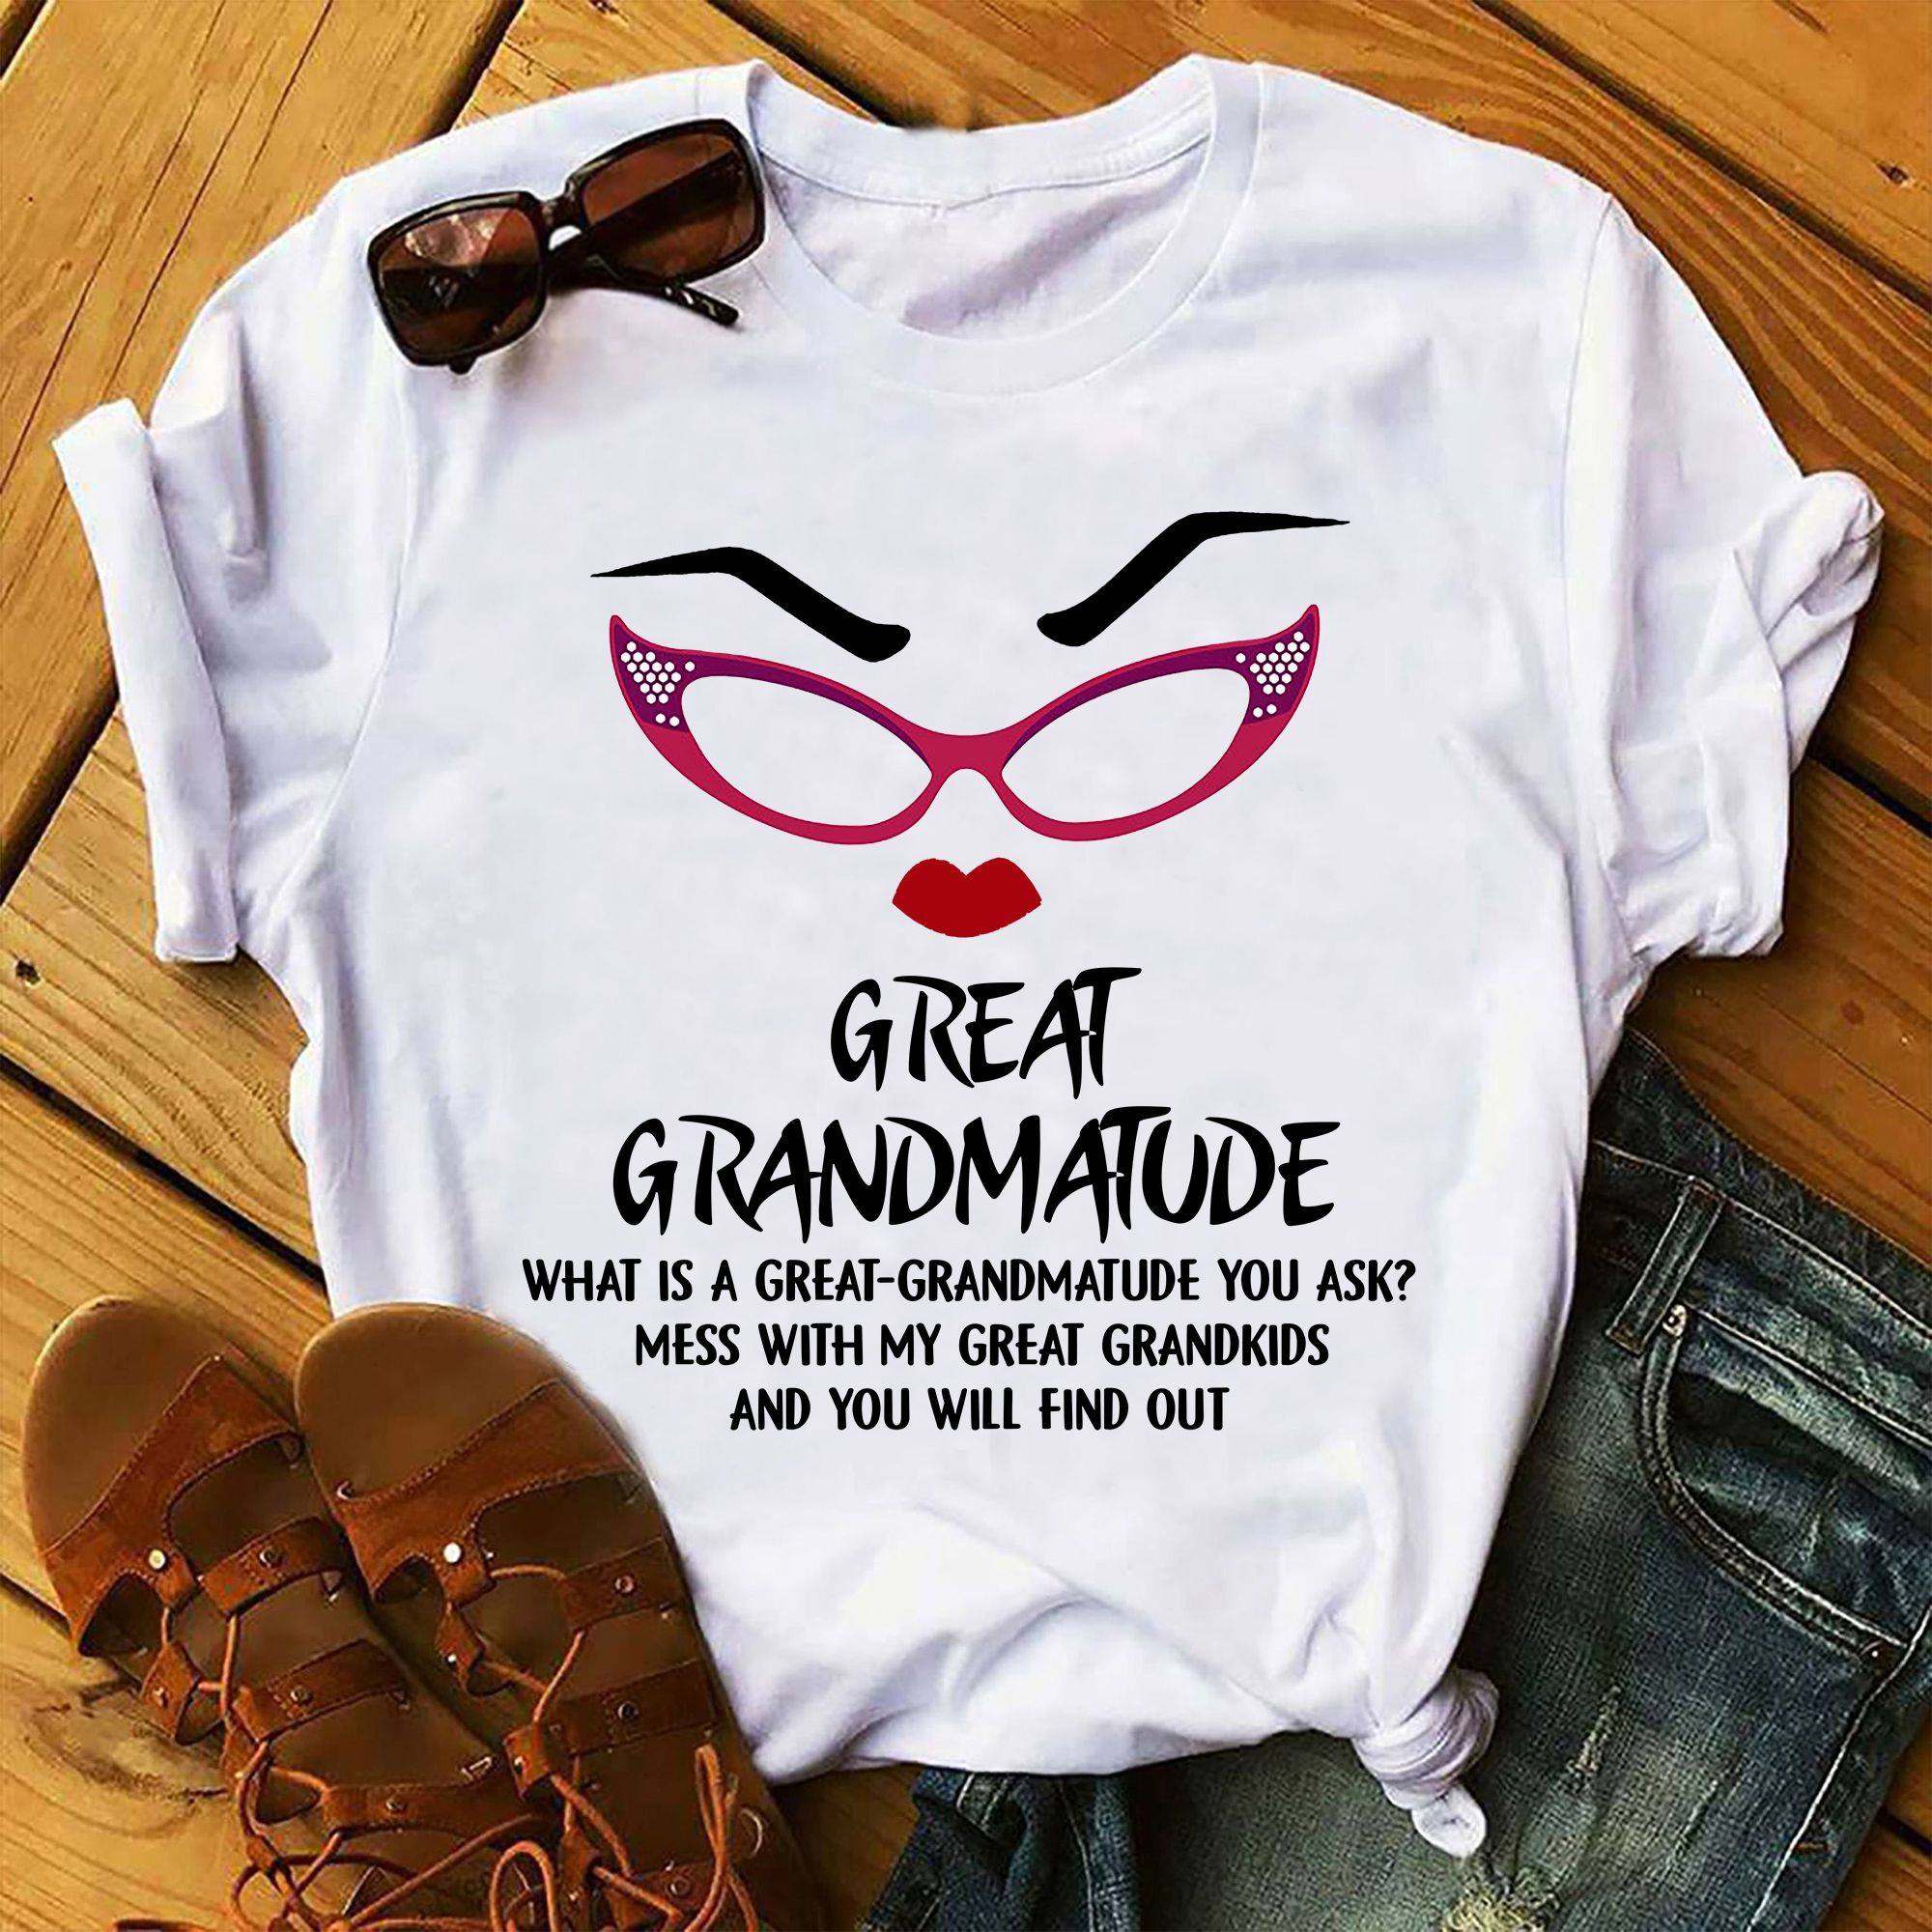 Great grandmatude mess with my great grandkids and you will find out - Great grandma attitude